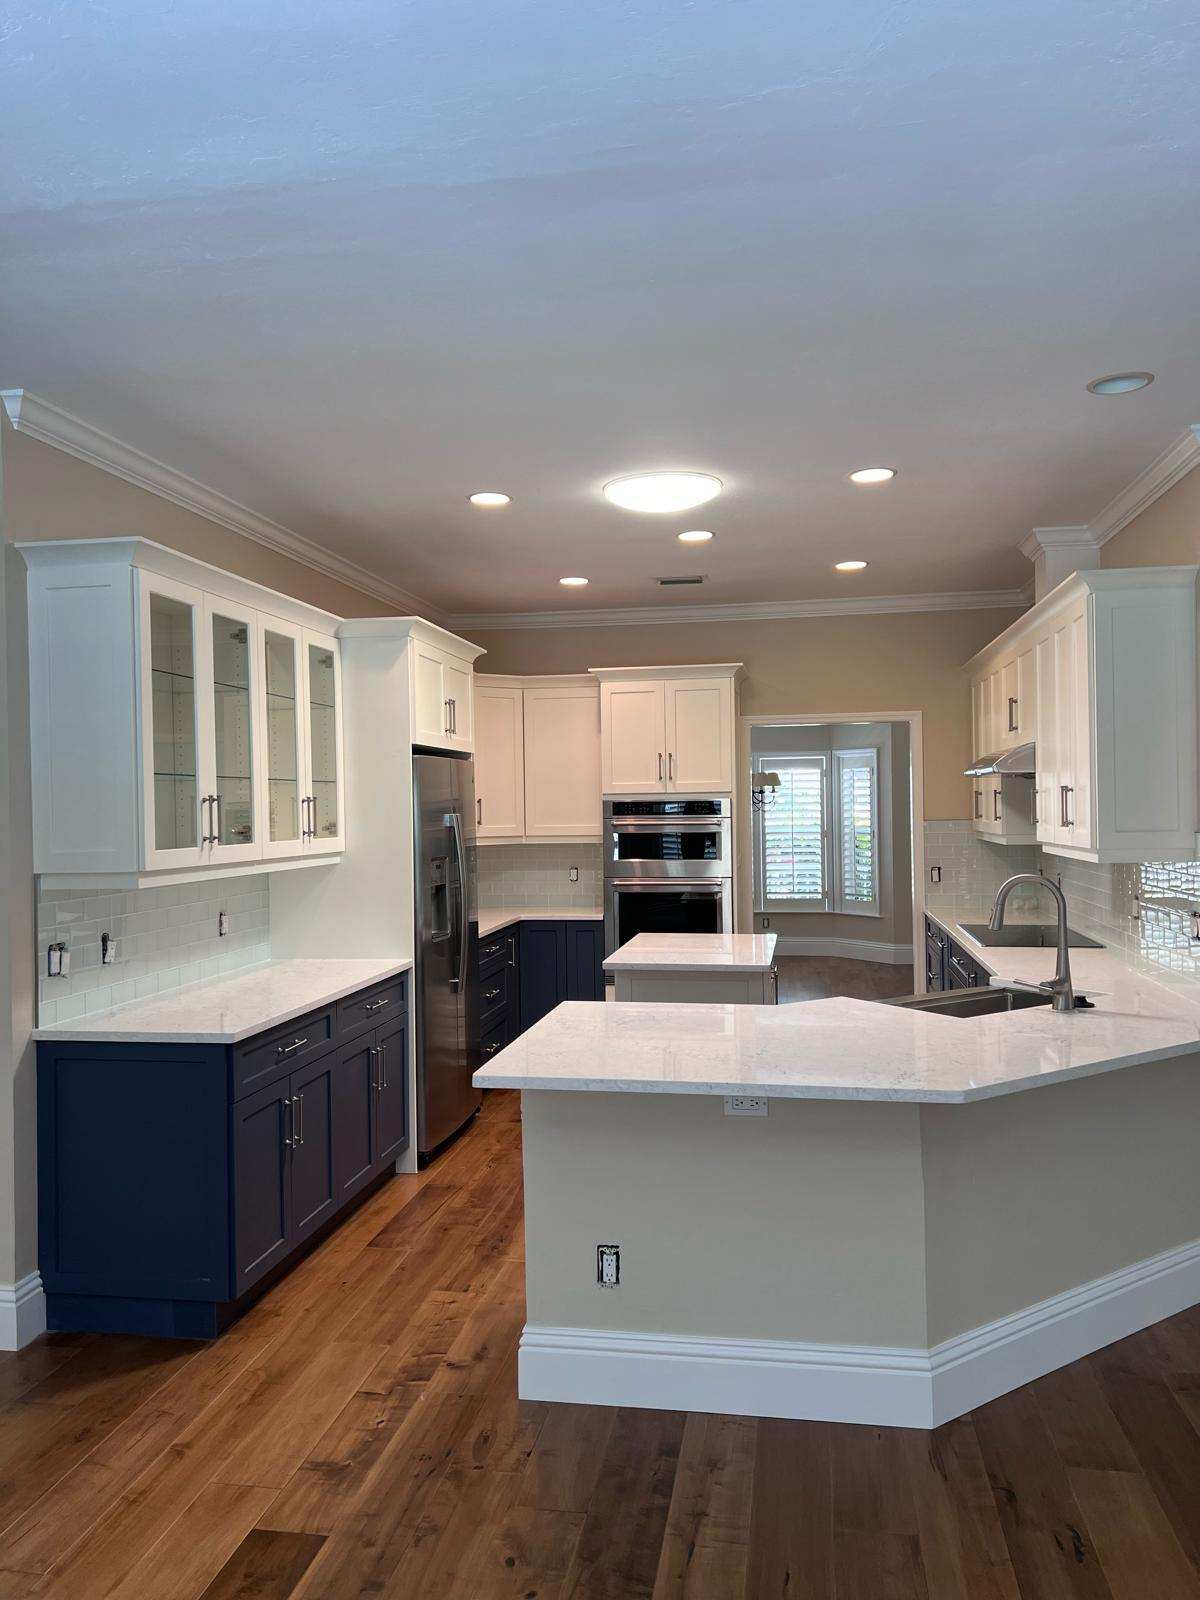 a kitchen with white cabinets and a blue island